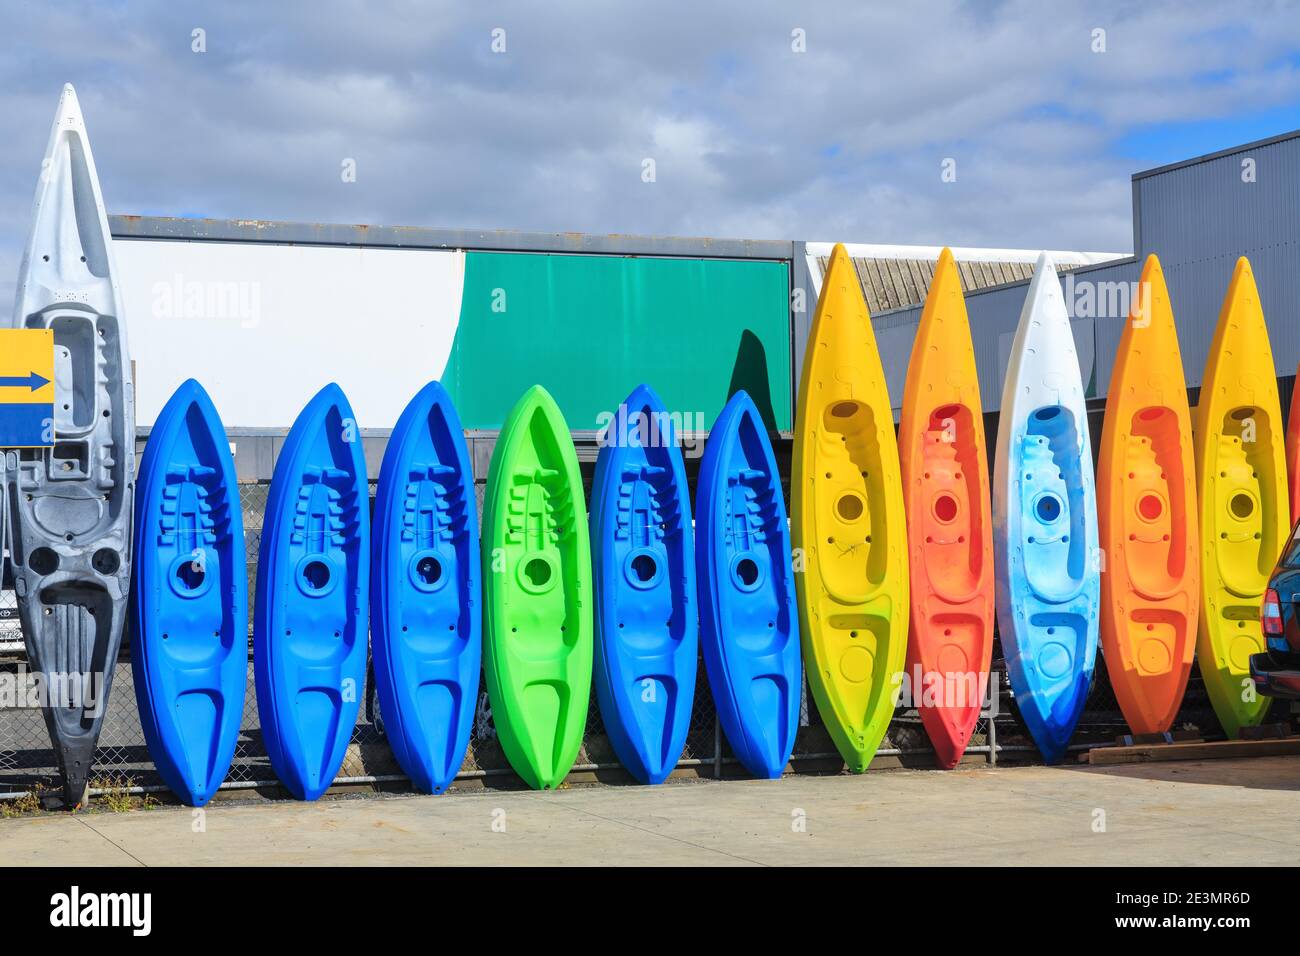 A row of plastic kayaks of various colors and sizes, lined up along a fence Stock Photo